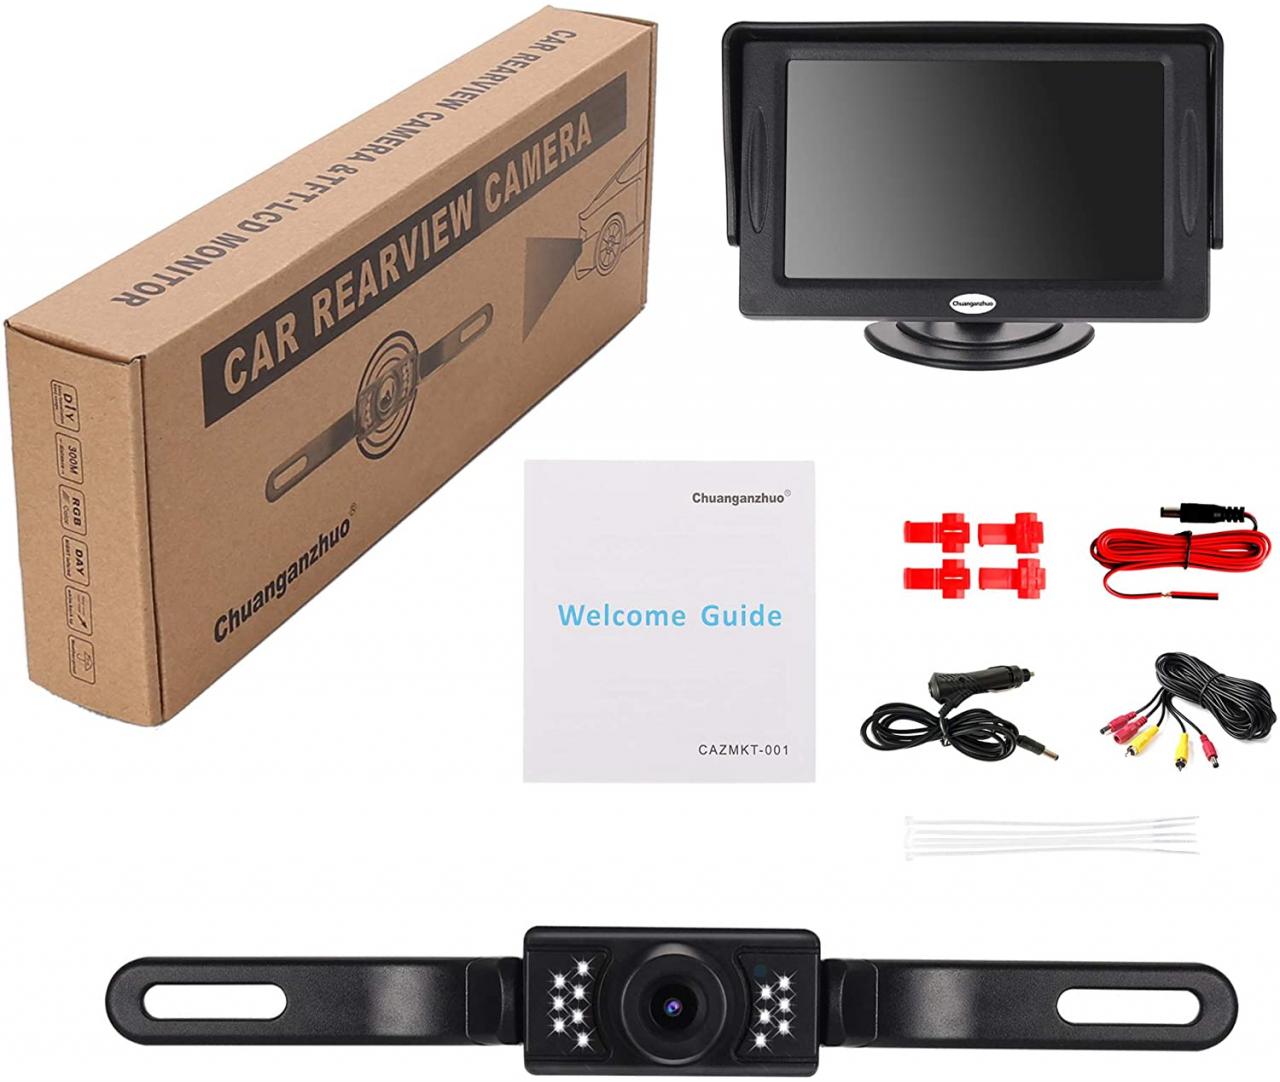 Buy Backup Camera and Monitor Kit for Car,Universal Wired Waterproof  Rear-View License Plate Car Rear Backup Camera + 4.3 LCD Rear View Monitor ( Camera and Monitor) Online in Hungary. B00QTGXYIE